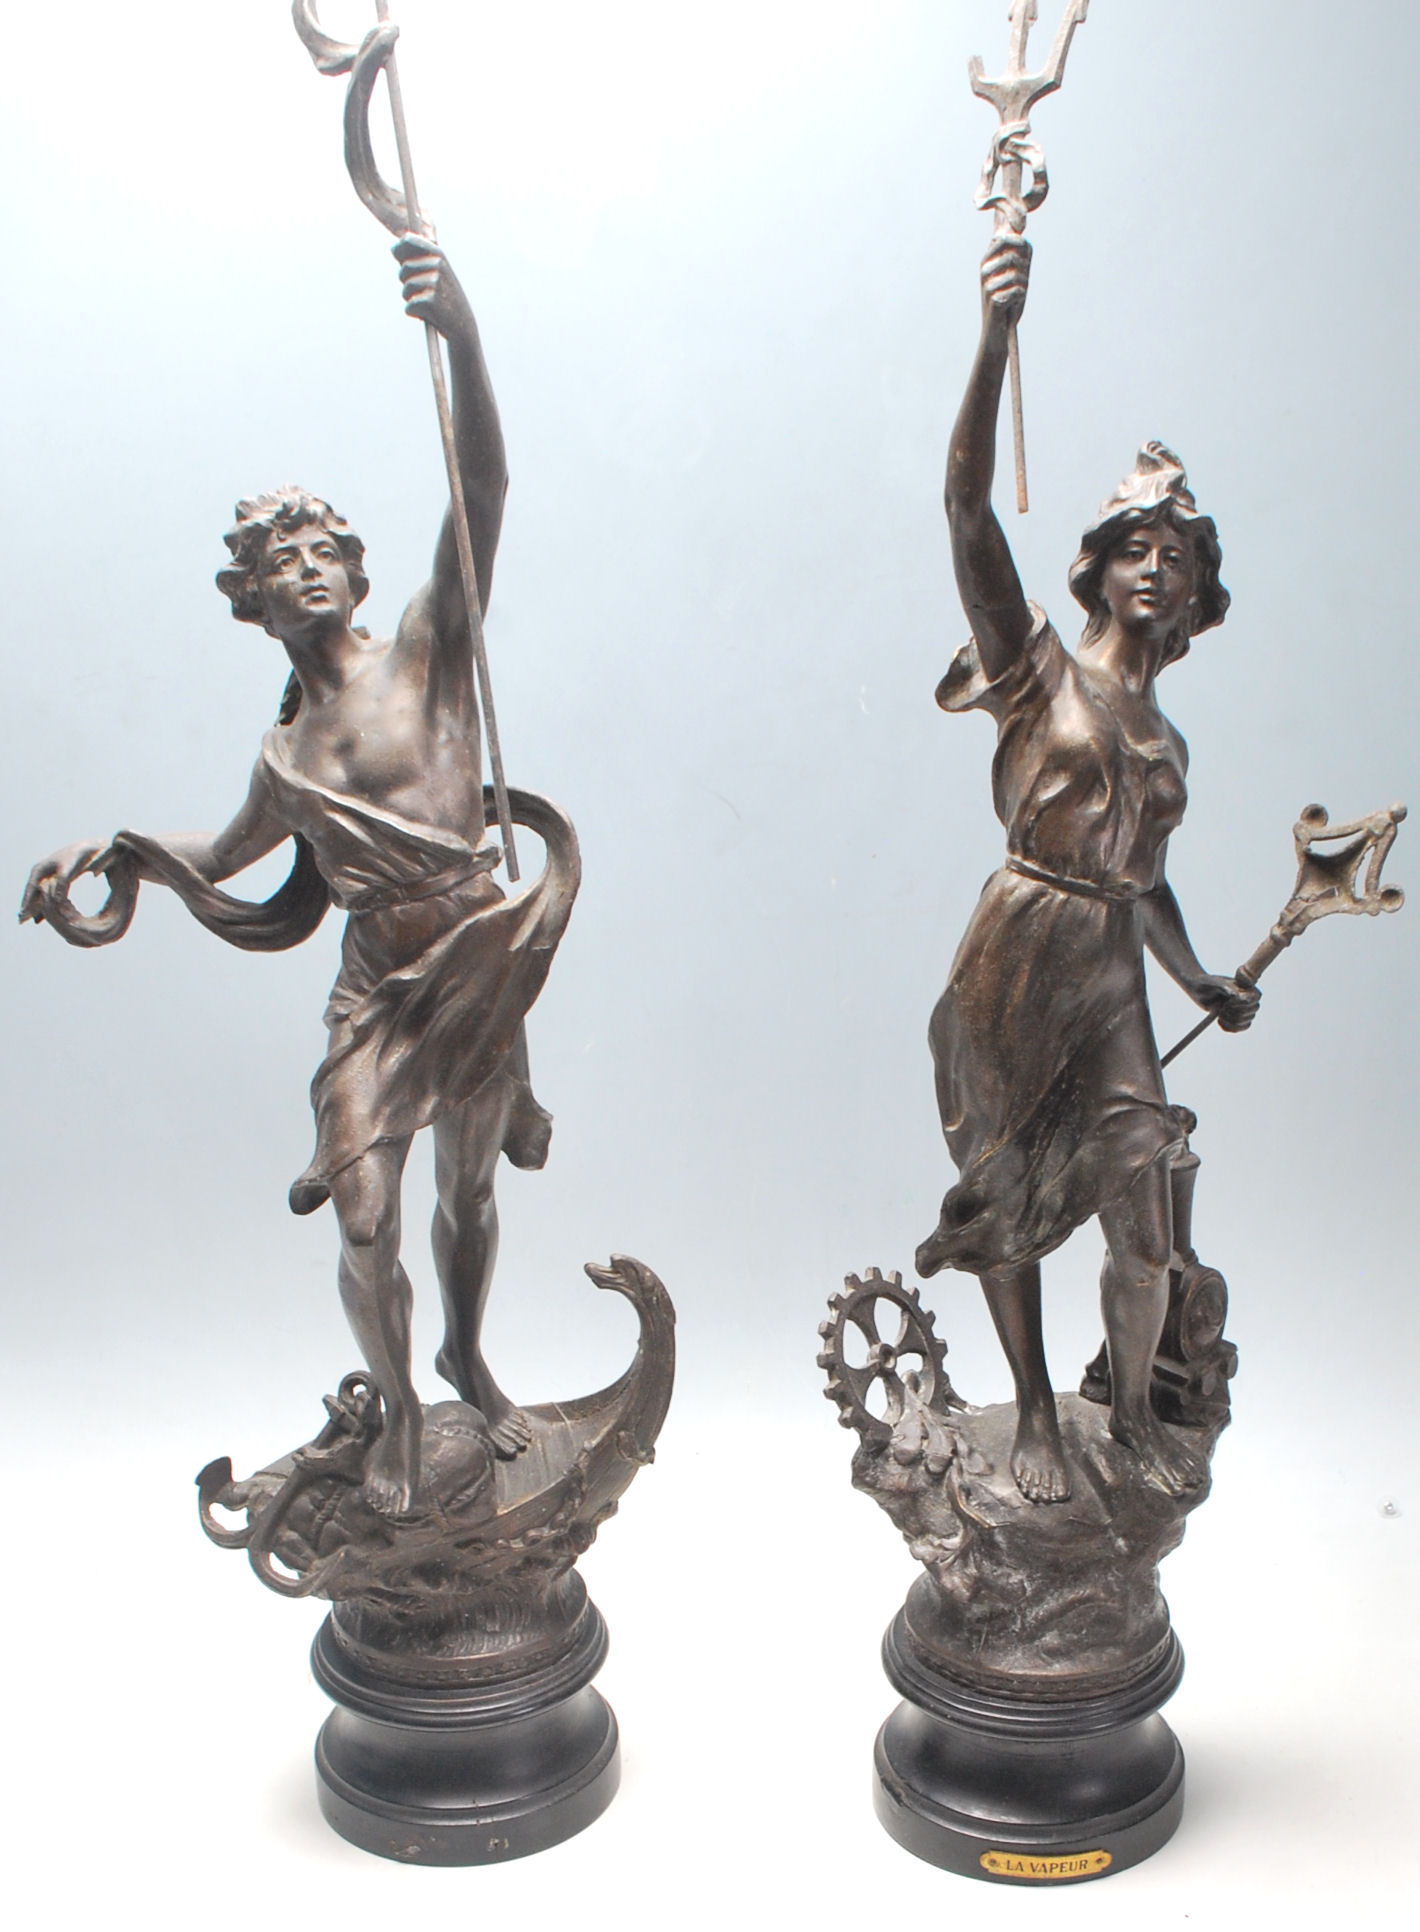 A pair of Victorian late 19th Century cold painted bronze spelter statues - figures representing